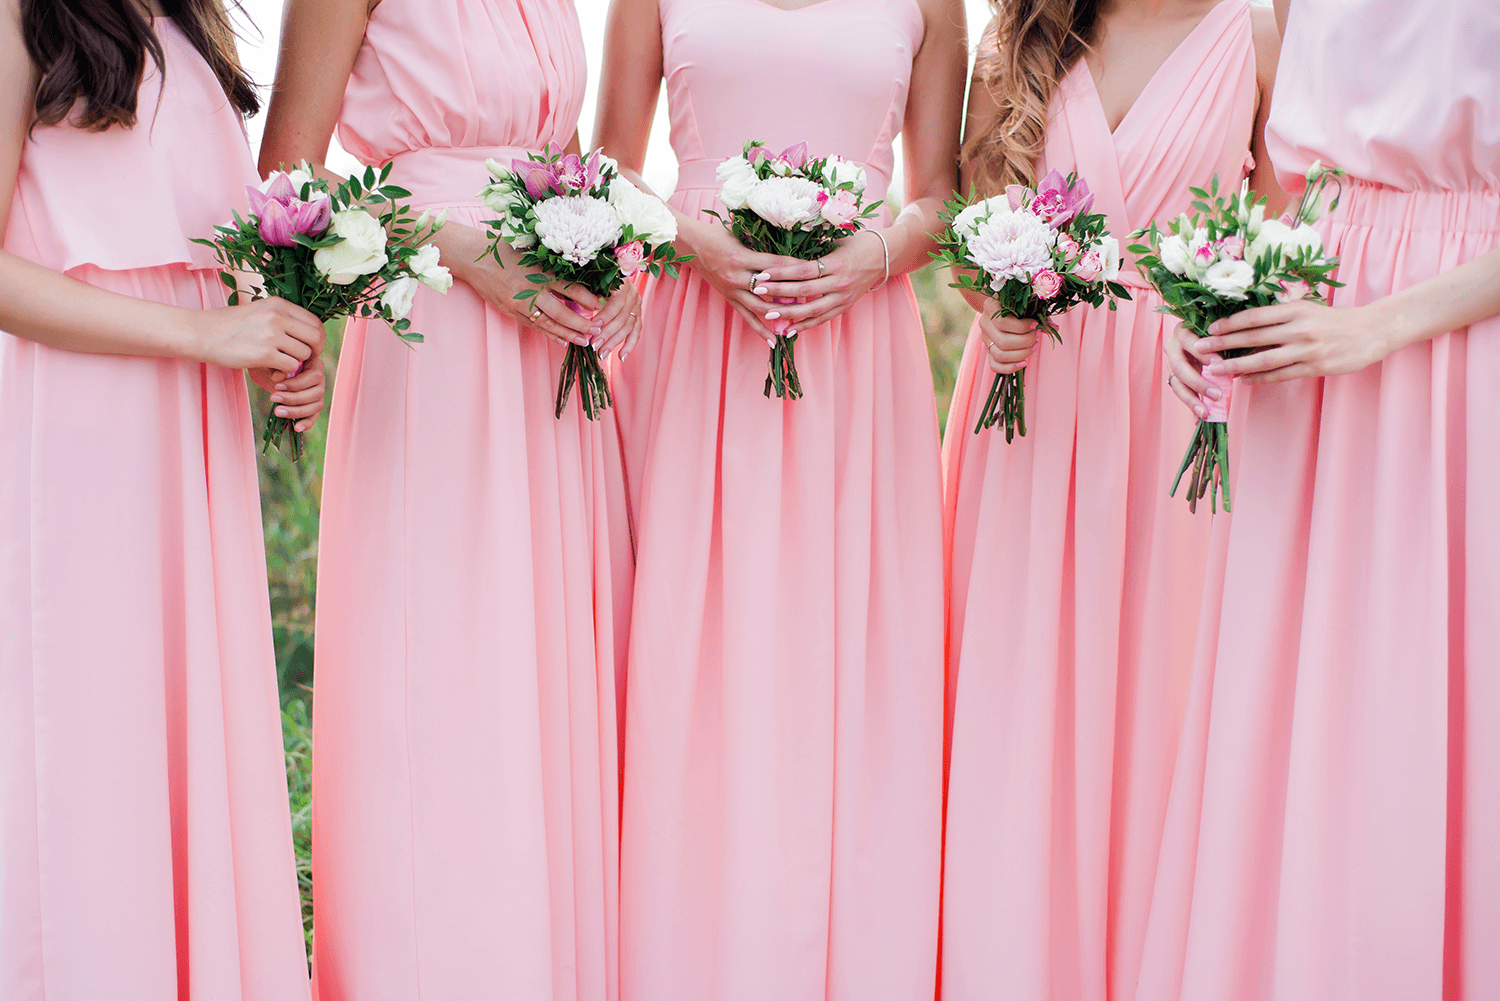 The Best Sites for Bridesmaid’s Dresses